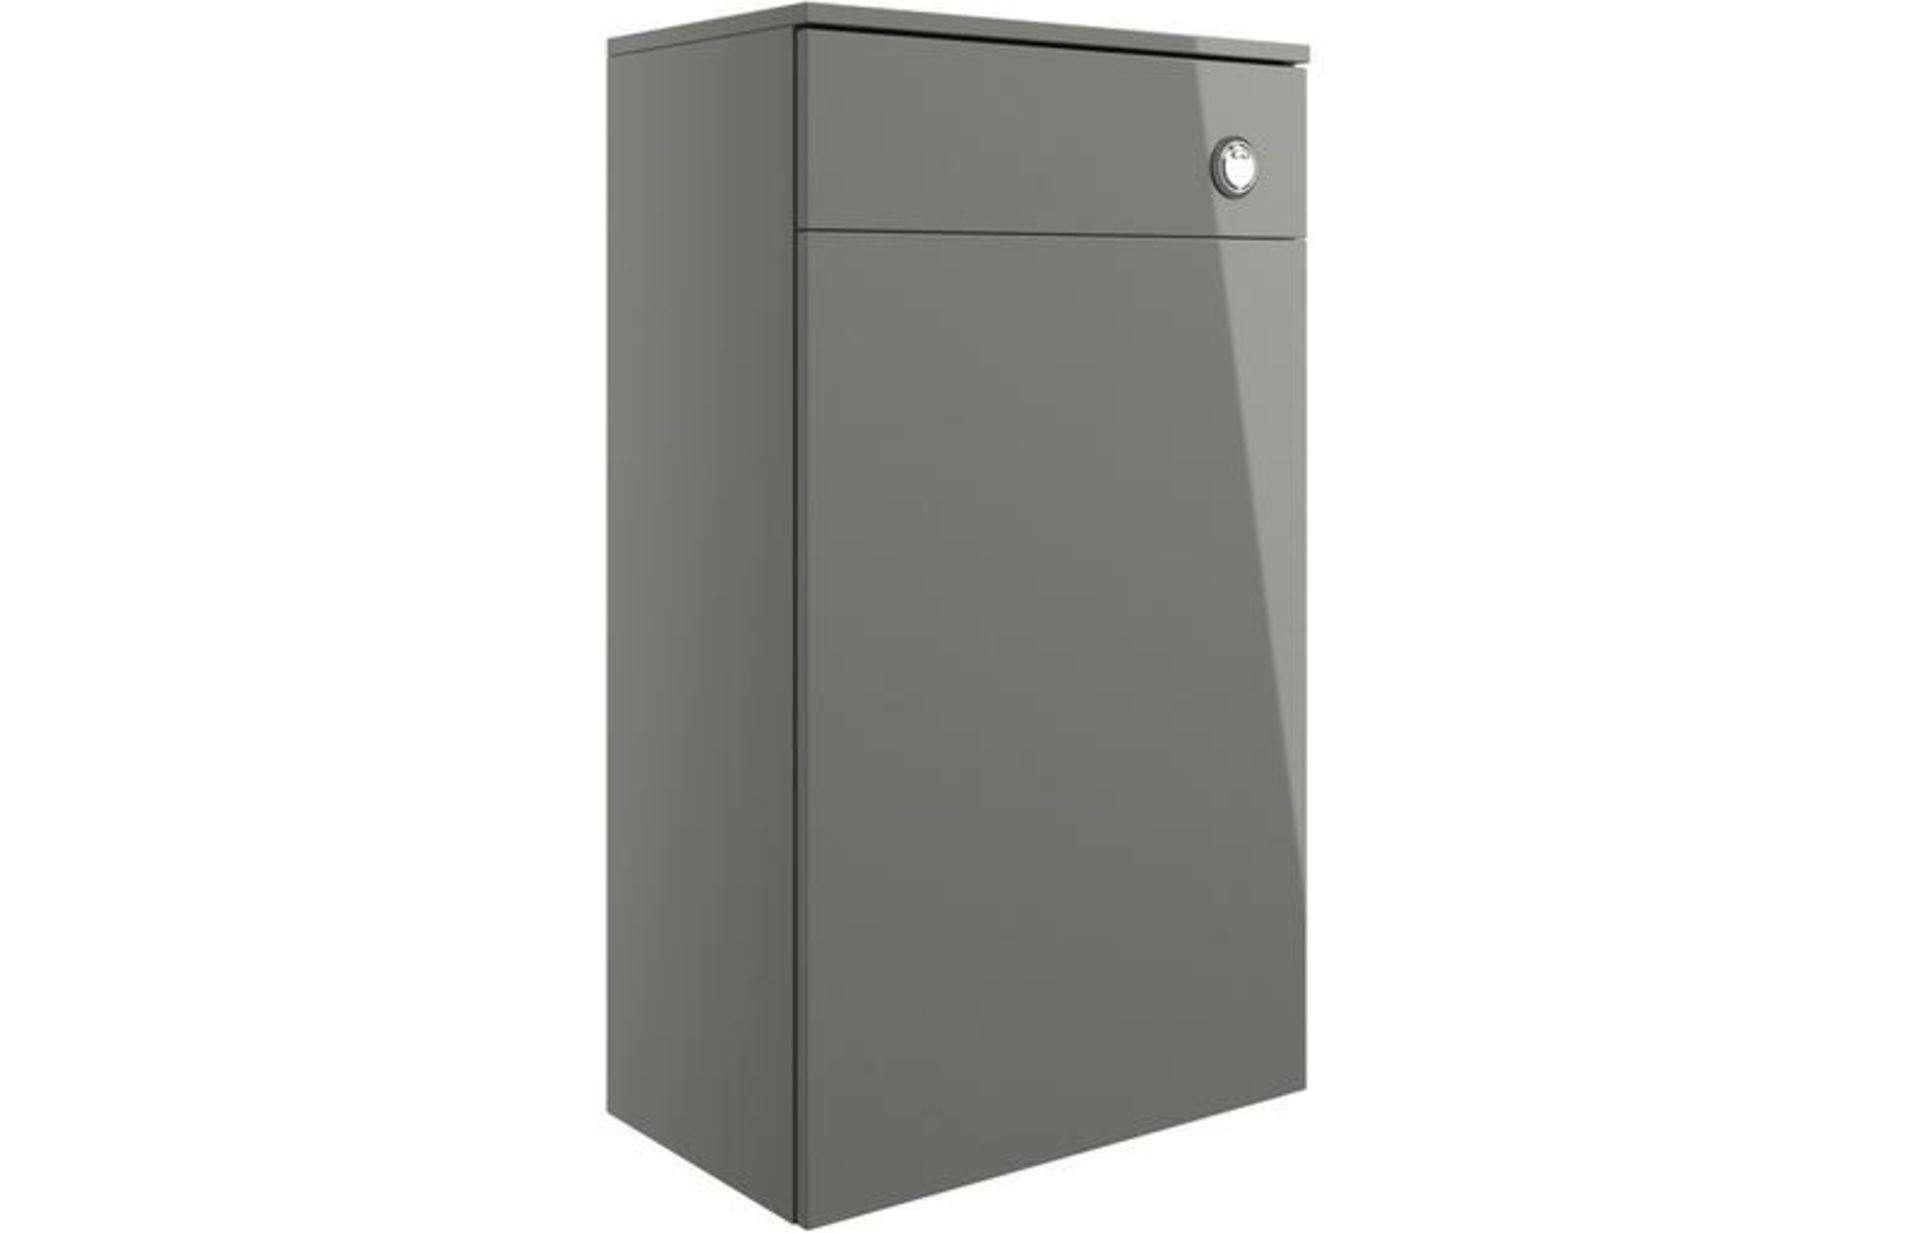 New (WG53) Butler 500mm WC Unit - Grey Gloss Strong 15mm cabinet, sides and back. Pre-assembl...